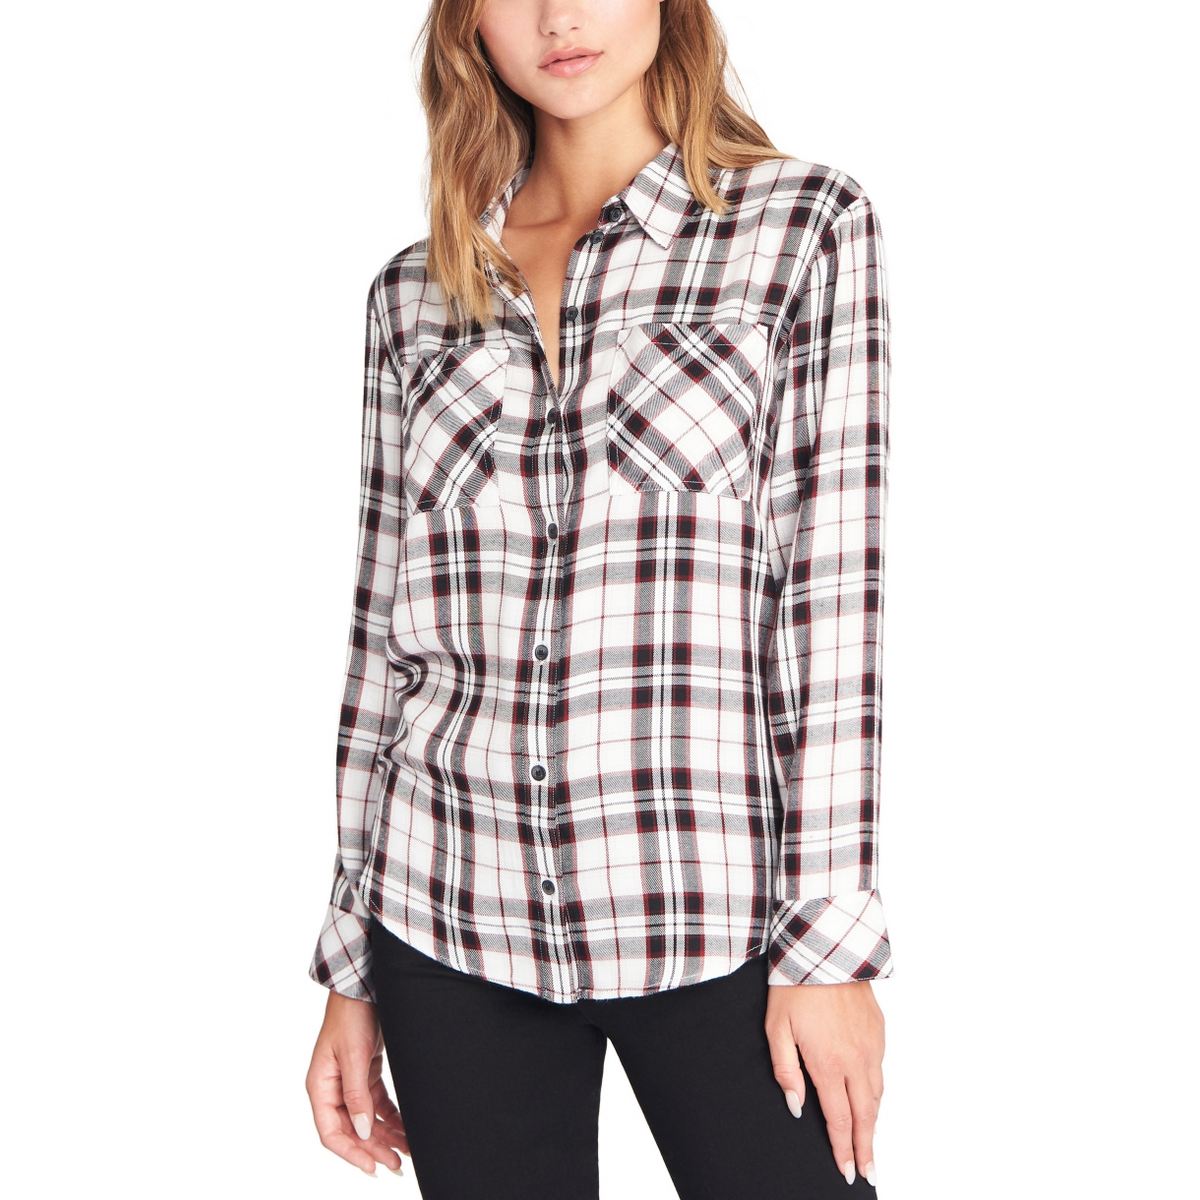 Dirty Flannel Plaid Button-Down Shirt in Multi Combo NWT Wildfox Couture 